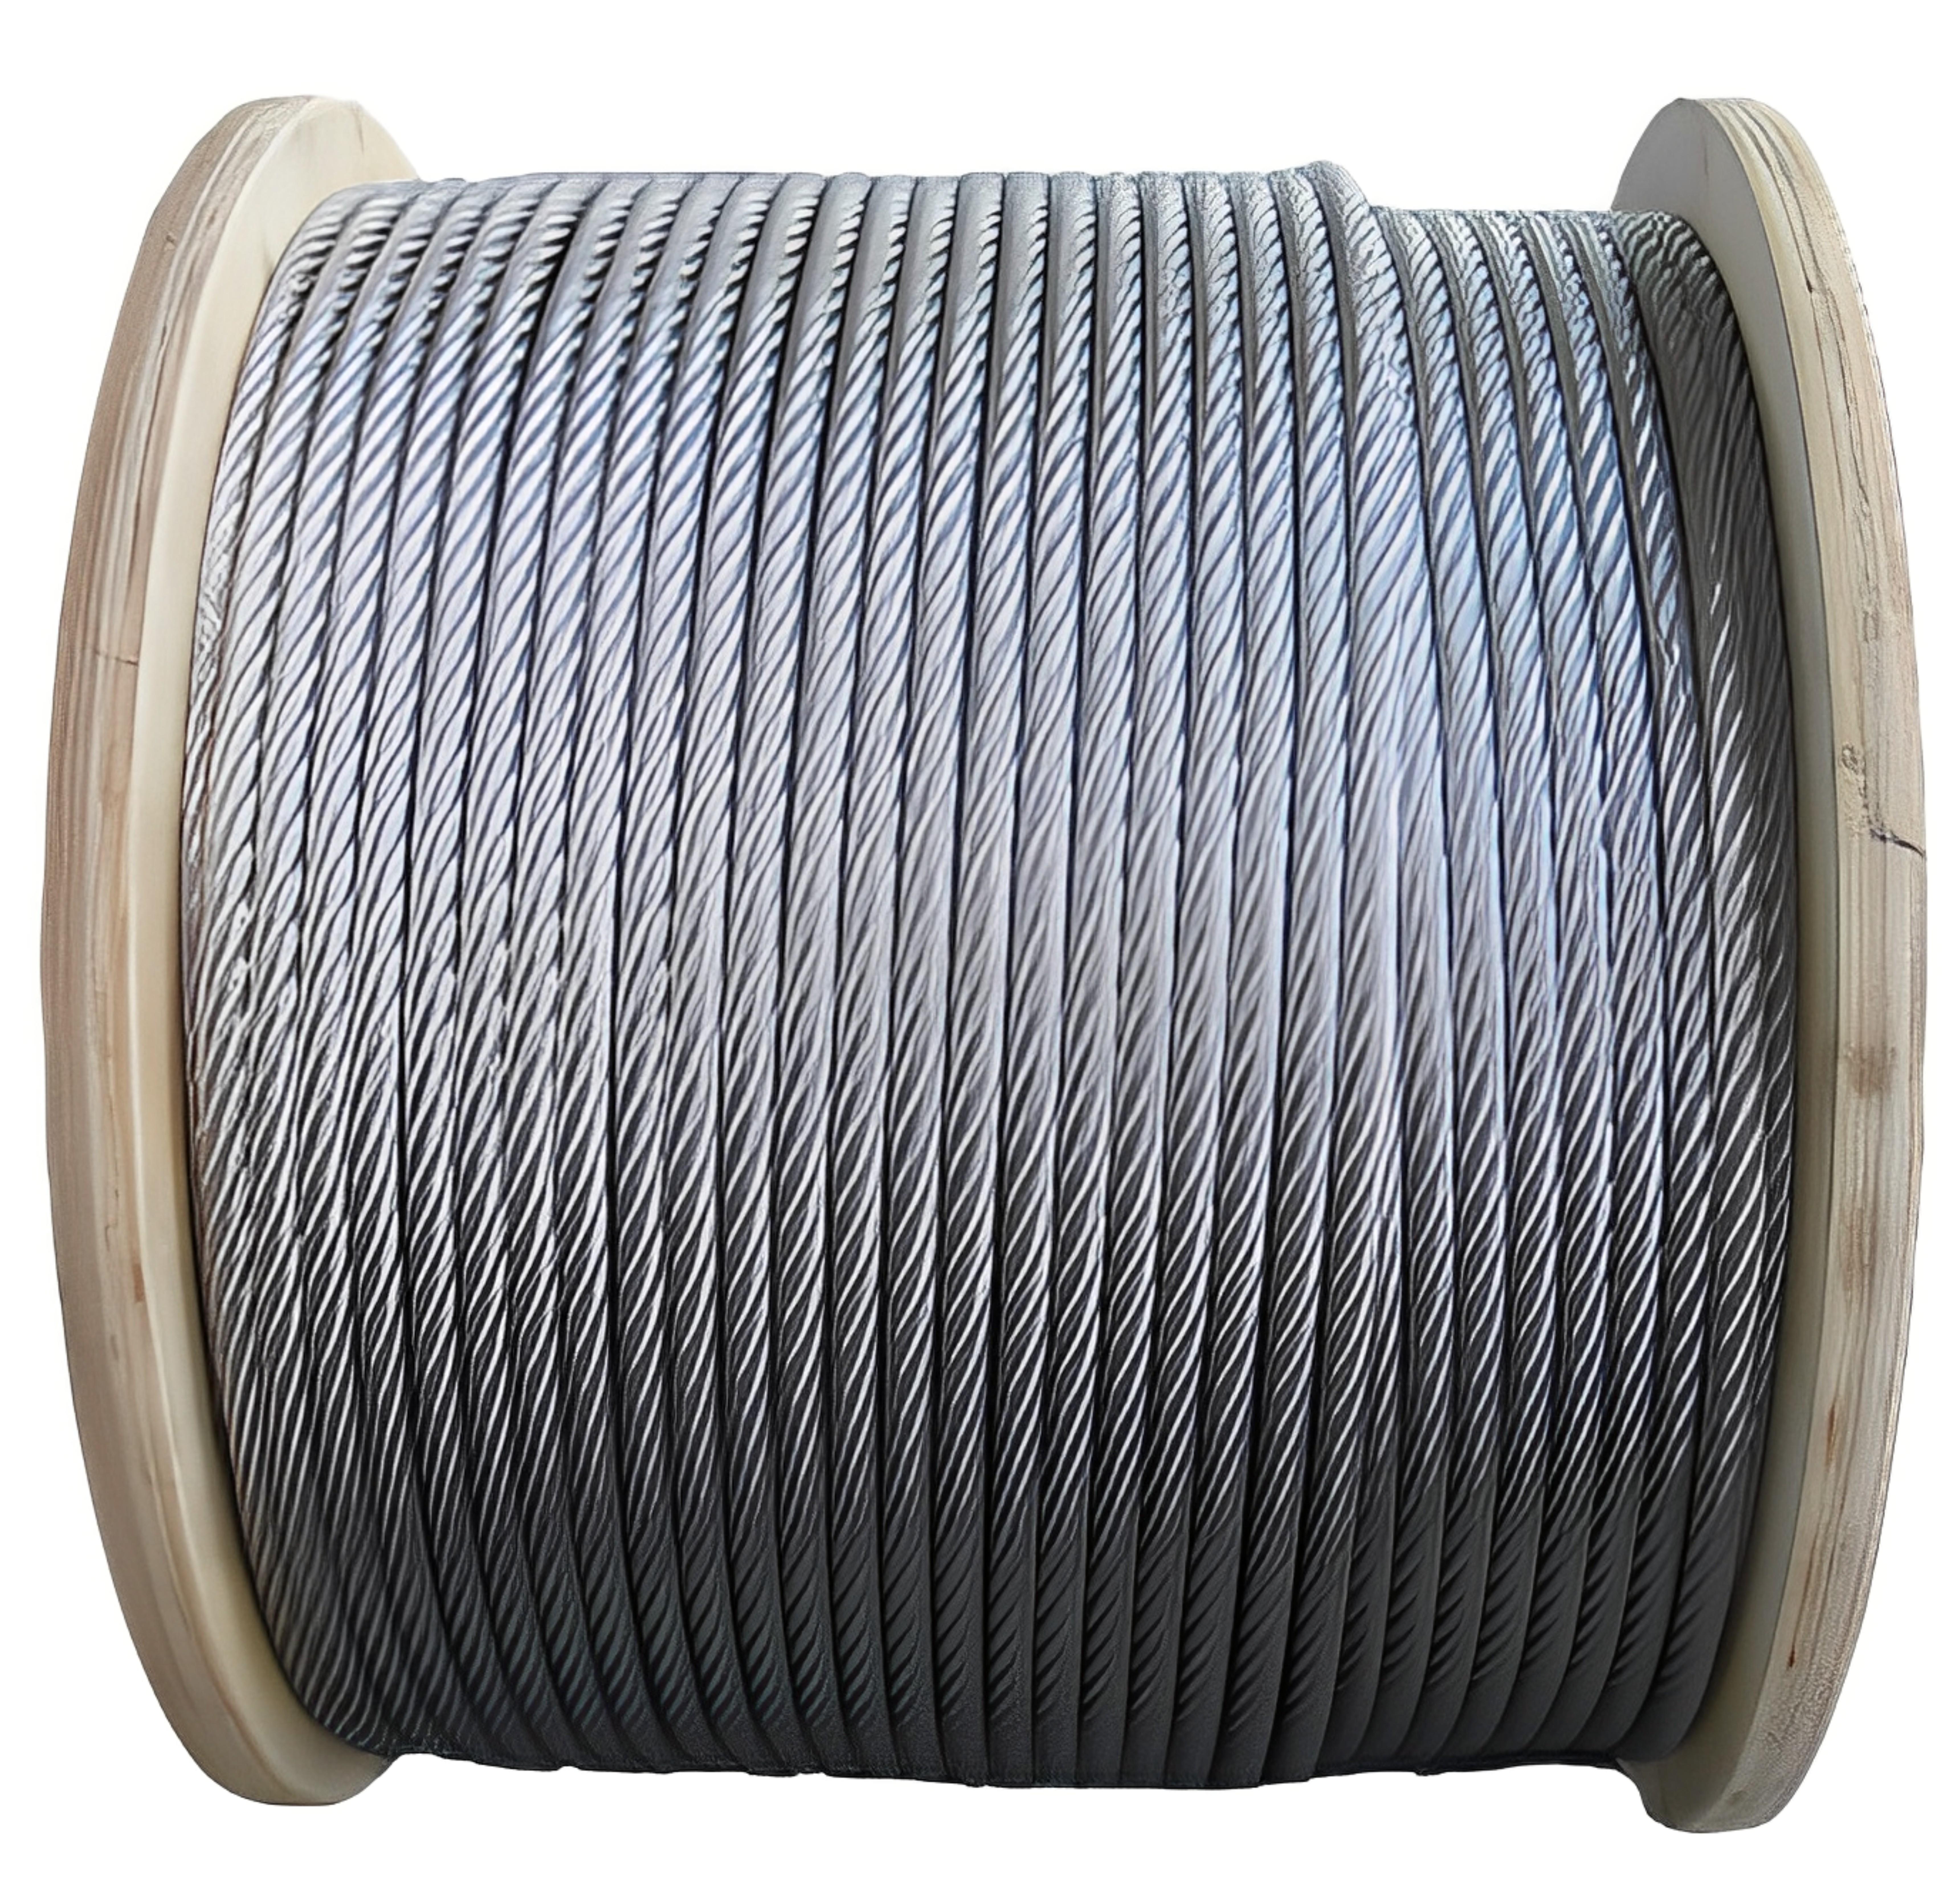 Buy 20 mm Steel Wire Rope 6 x 36 1960 N/mm2 100 - 200 m online at best  rates in India